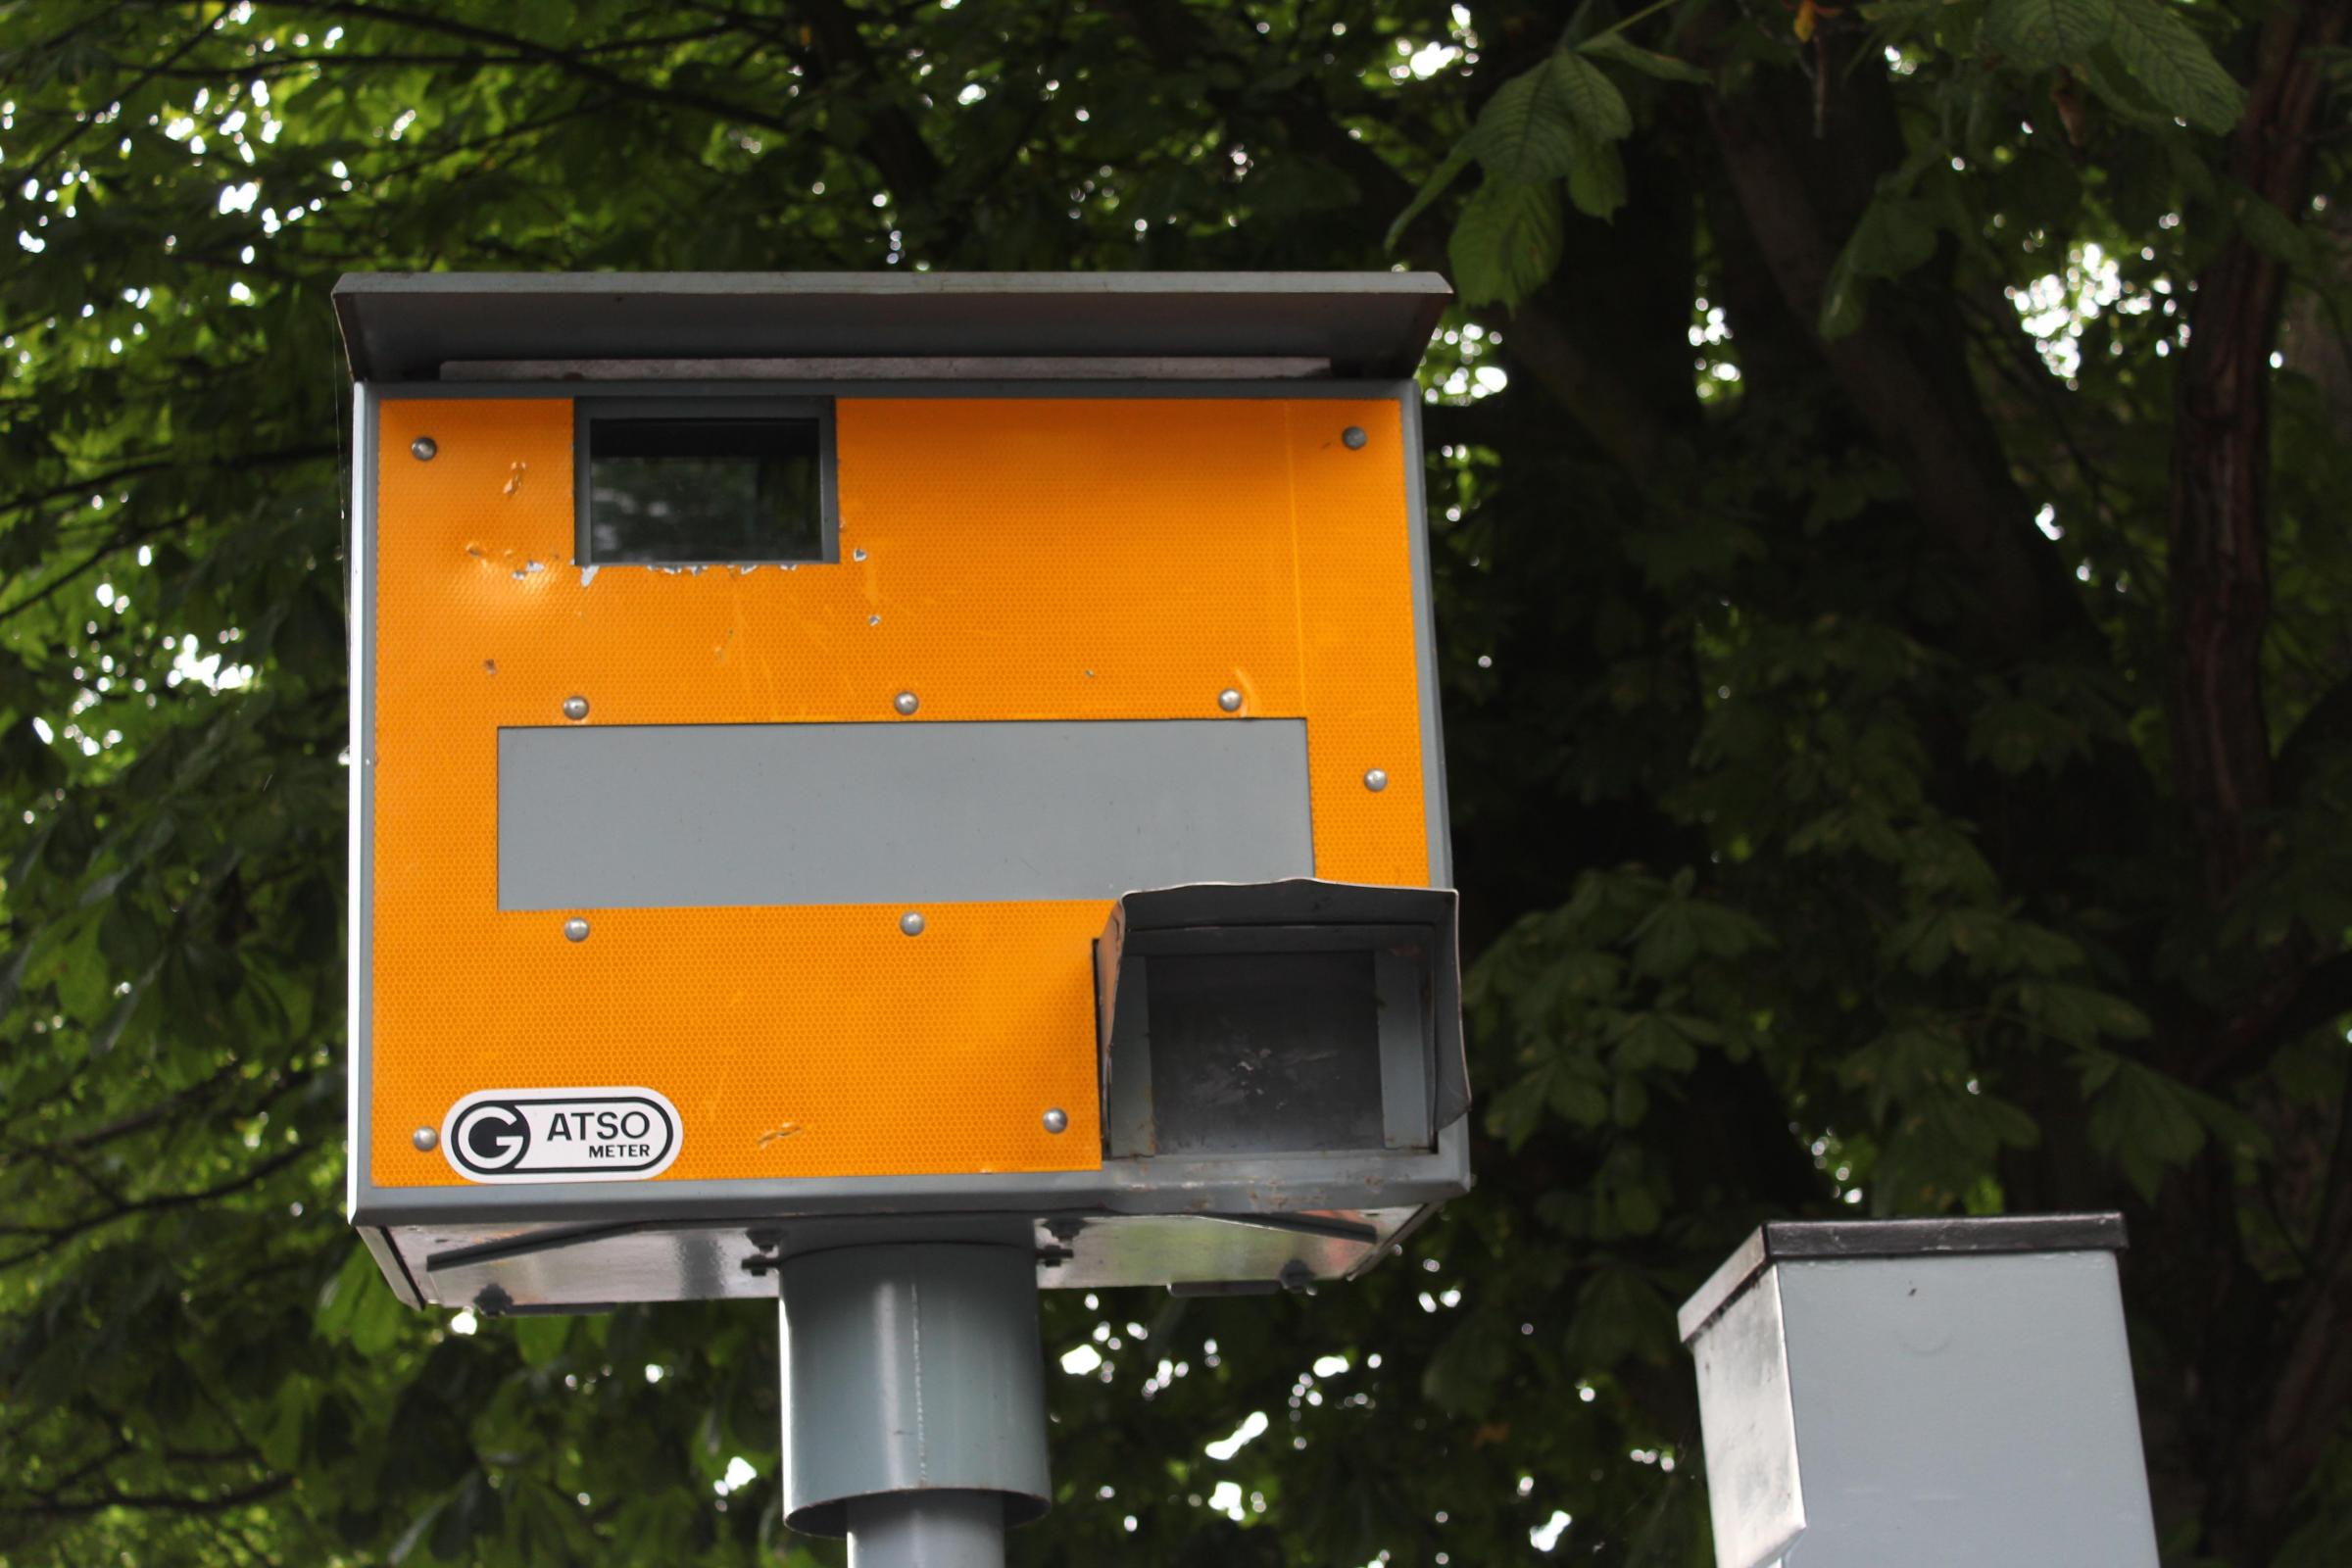 A speed camera, which will not make any money if we have driverless cars. Photo: Pixabay